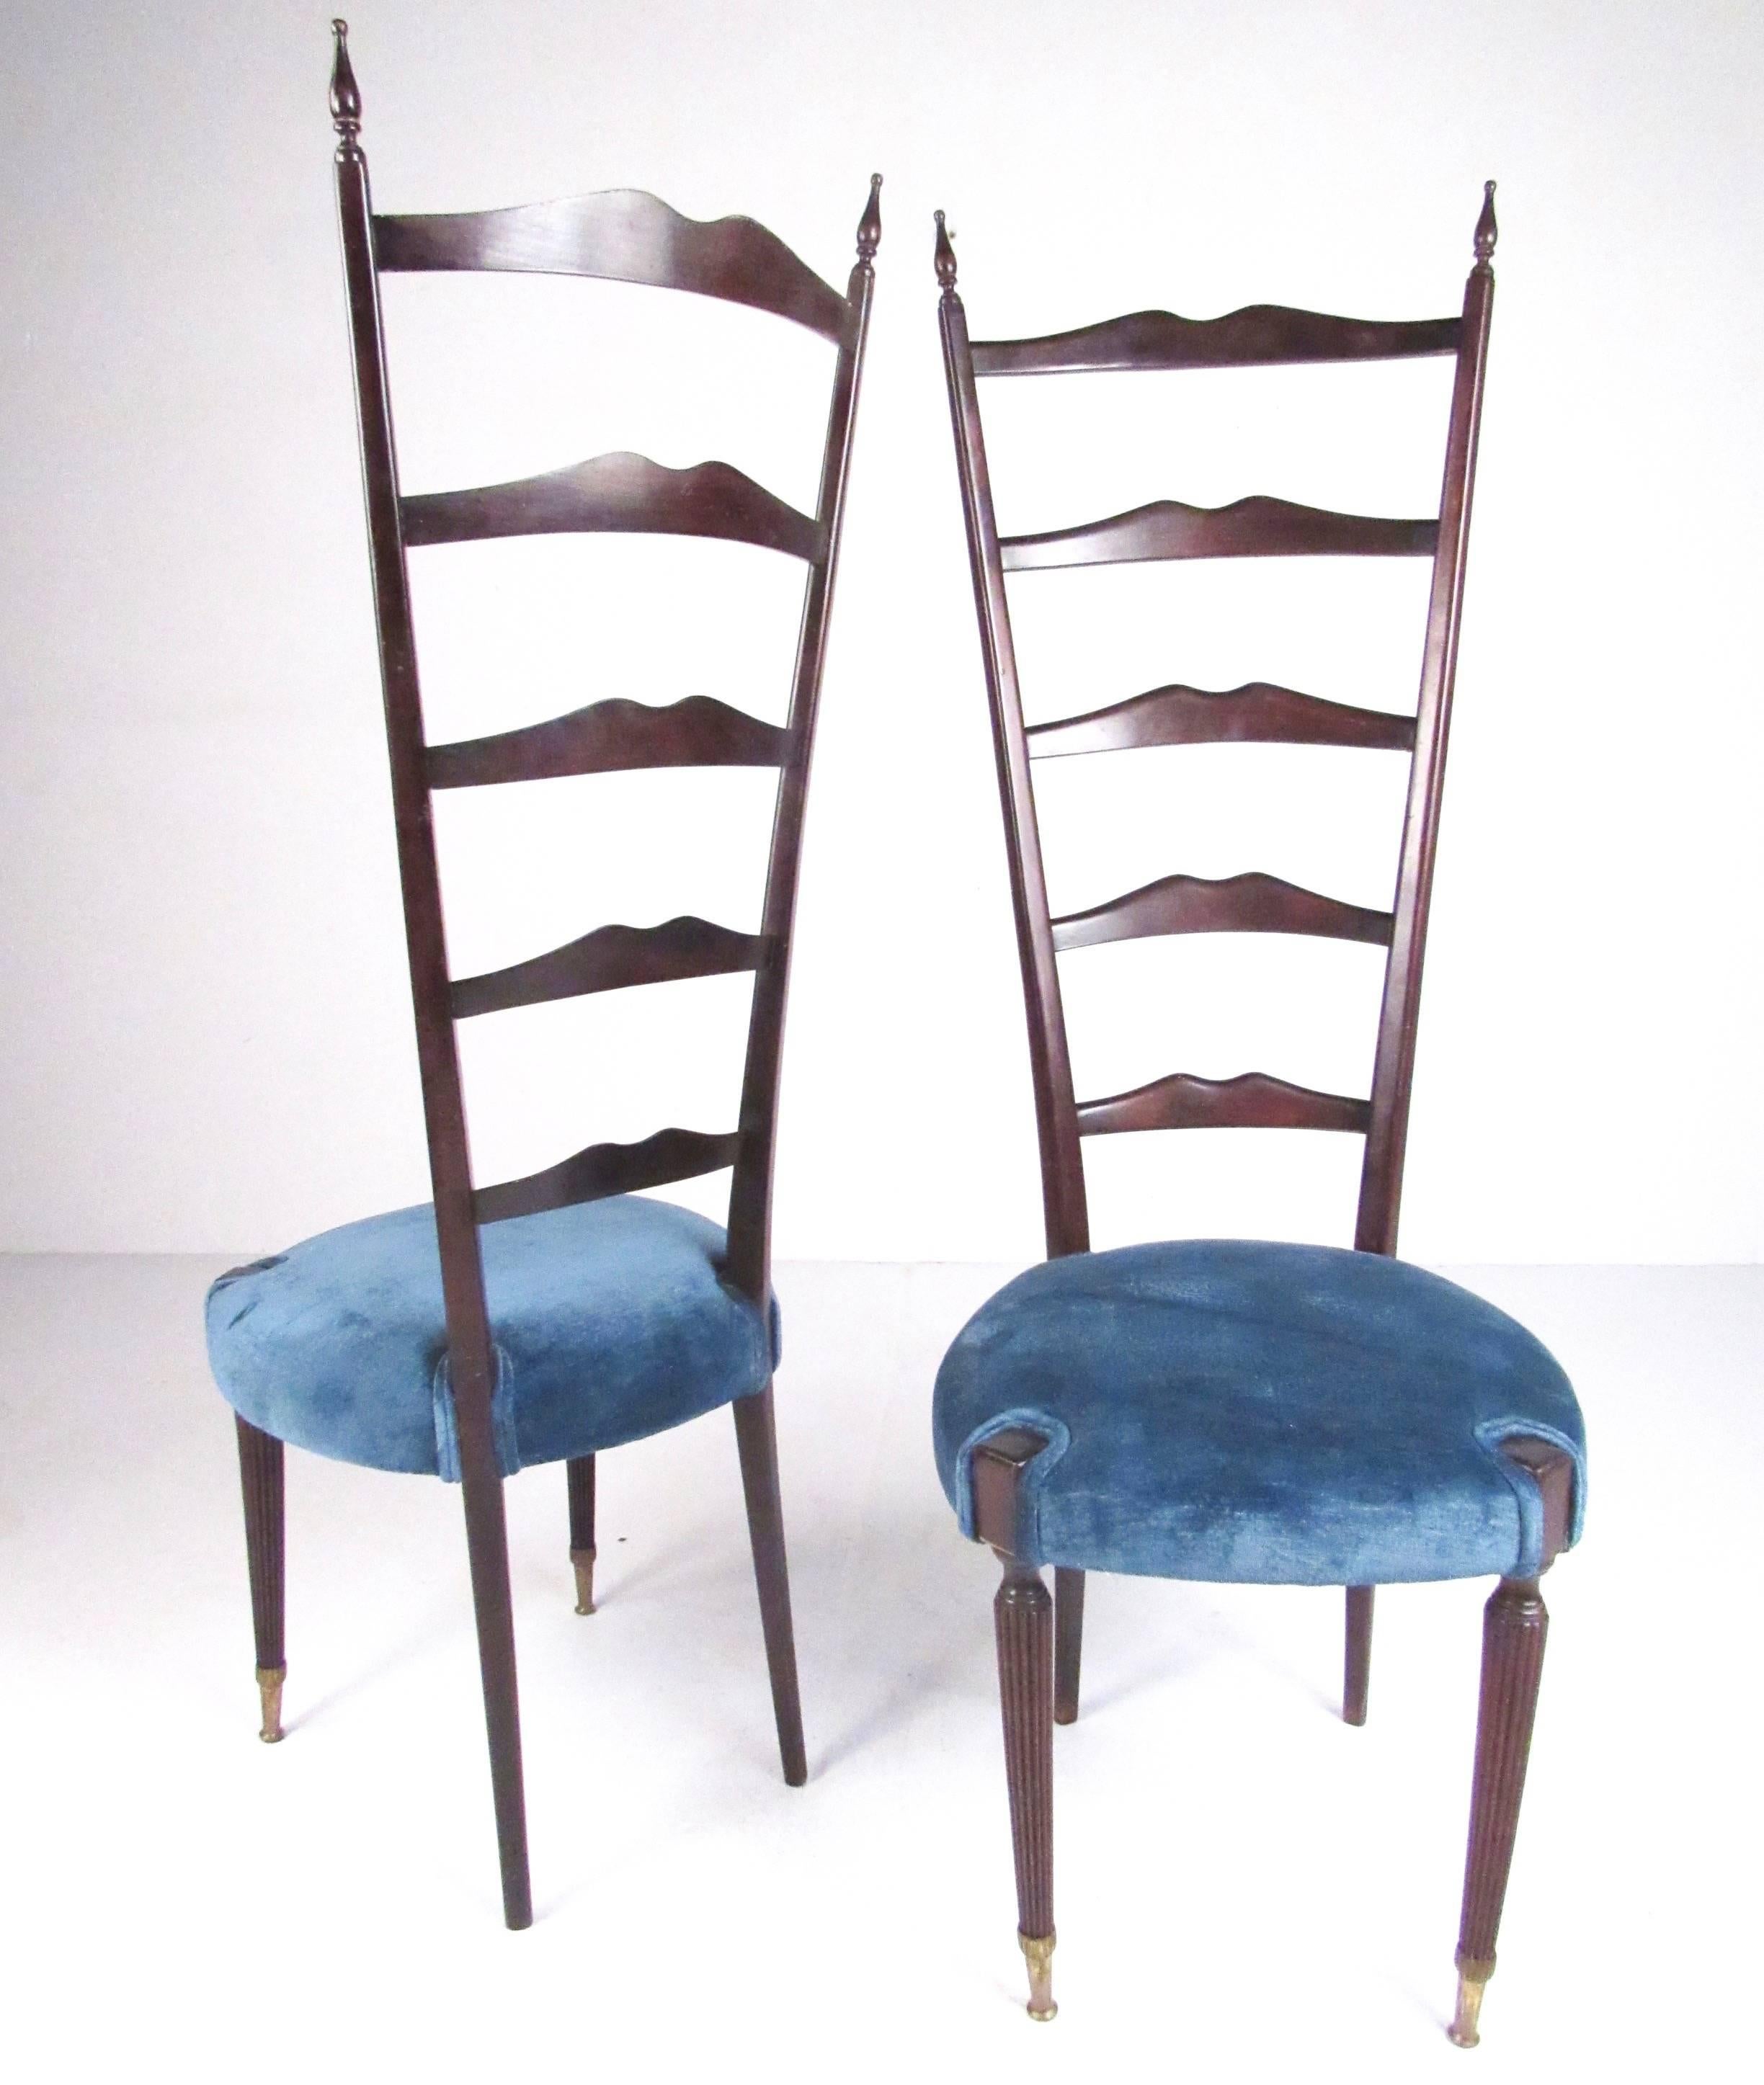 This stunning pair of high back side chairs feature impressive Italian Chiavari style. With sculptural ladder back design, tapered legs, brass sabots, and padded upholstered seats this elegant matching set make a beautiful addition to any luxury